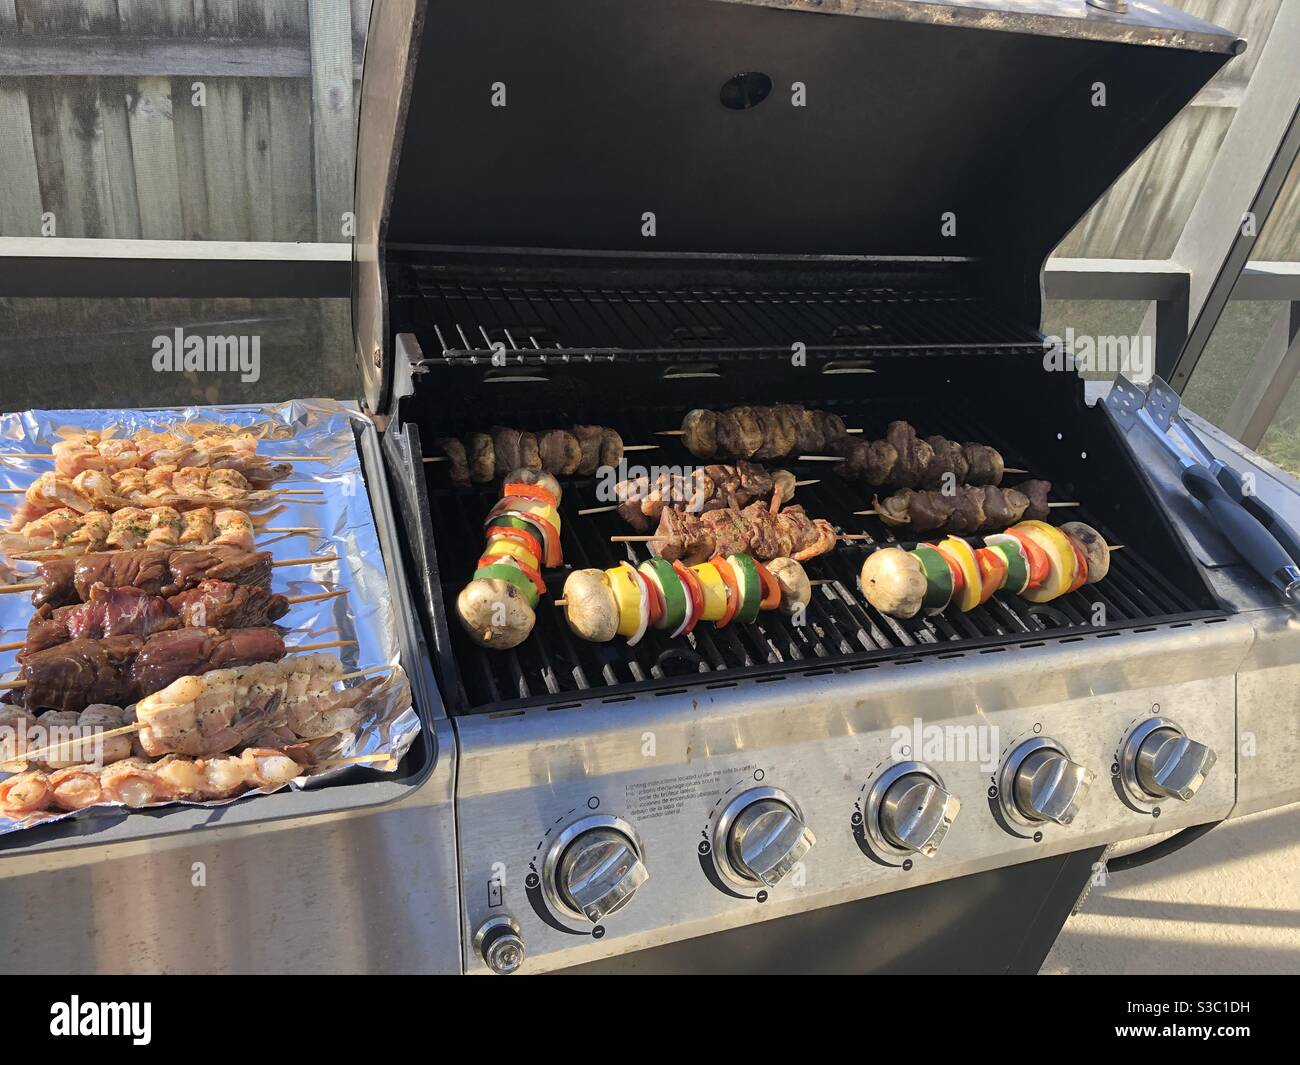 Grilling good meat and vegetable kebabs. Stock Photo